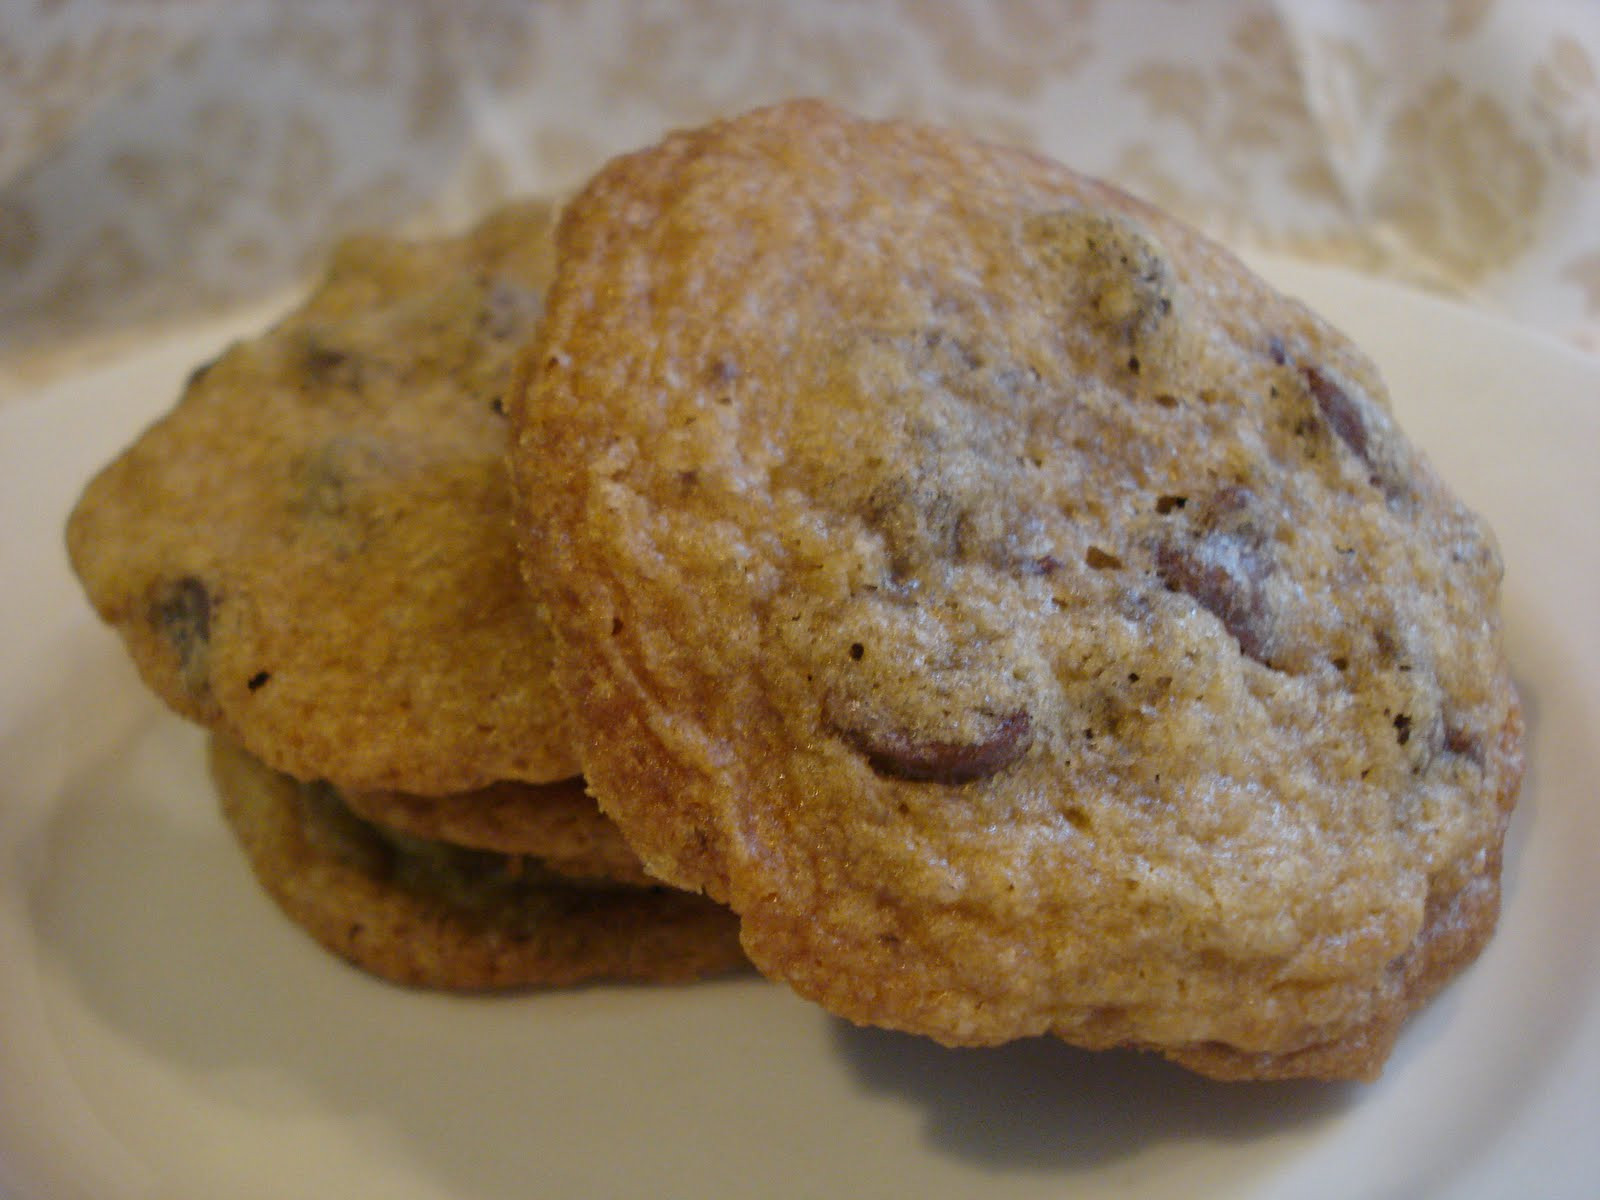 Tate'S Bake Shop Chocolate Chip Cookies
 The Cookie Scoop Chocolate Chip Cookies Tate s Bake